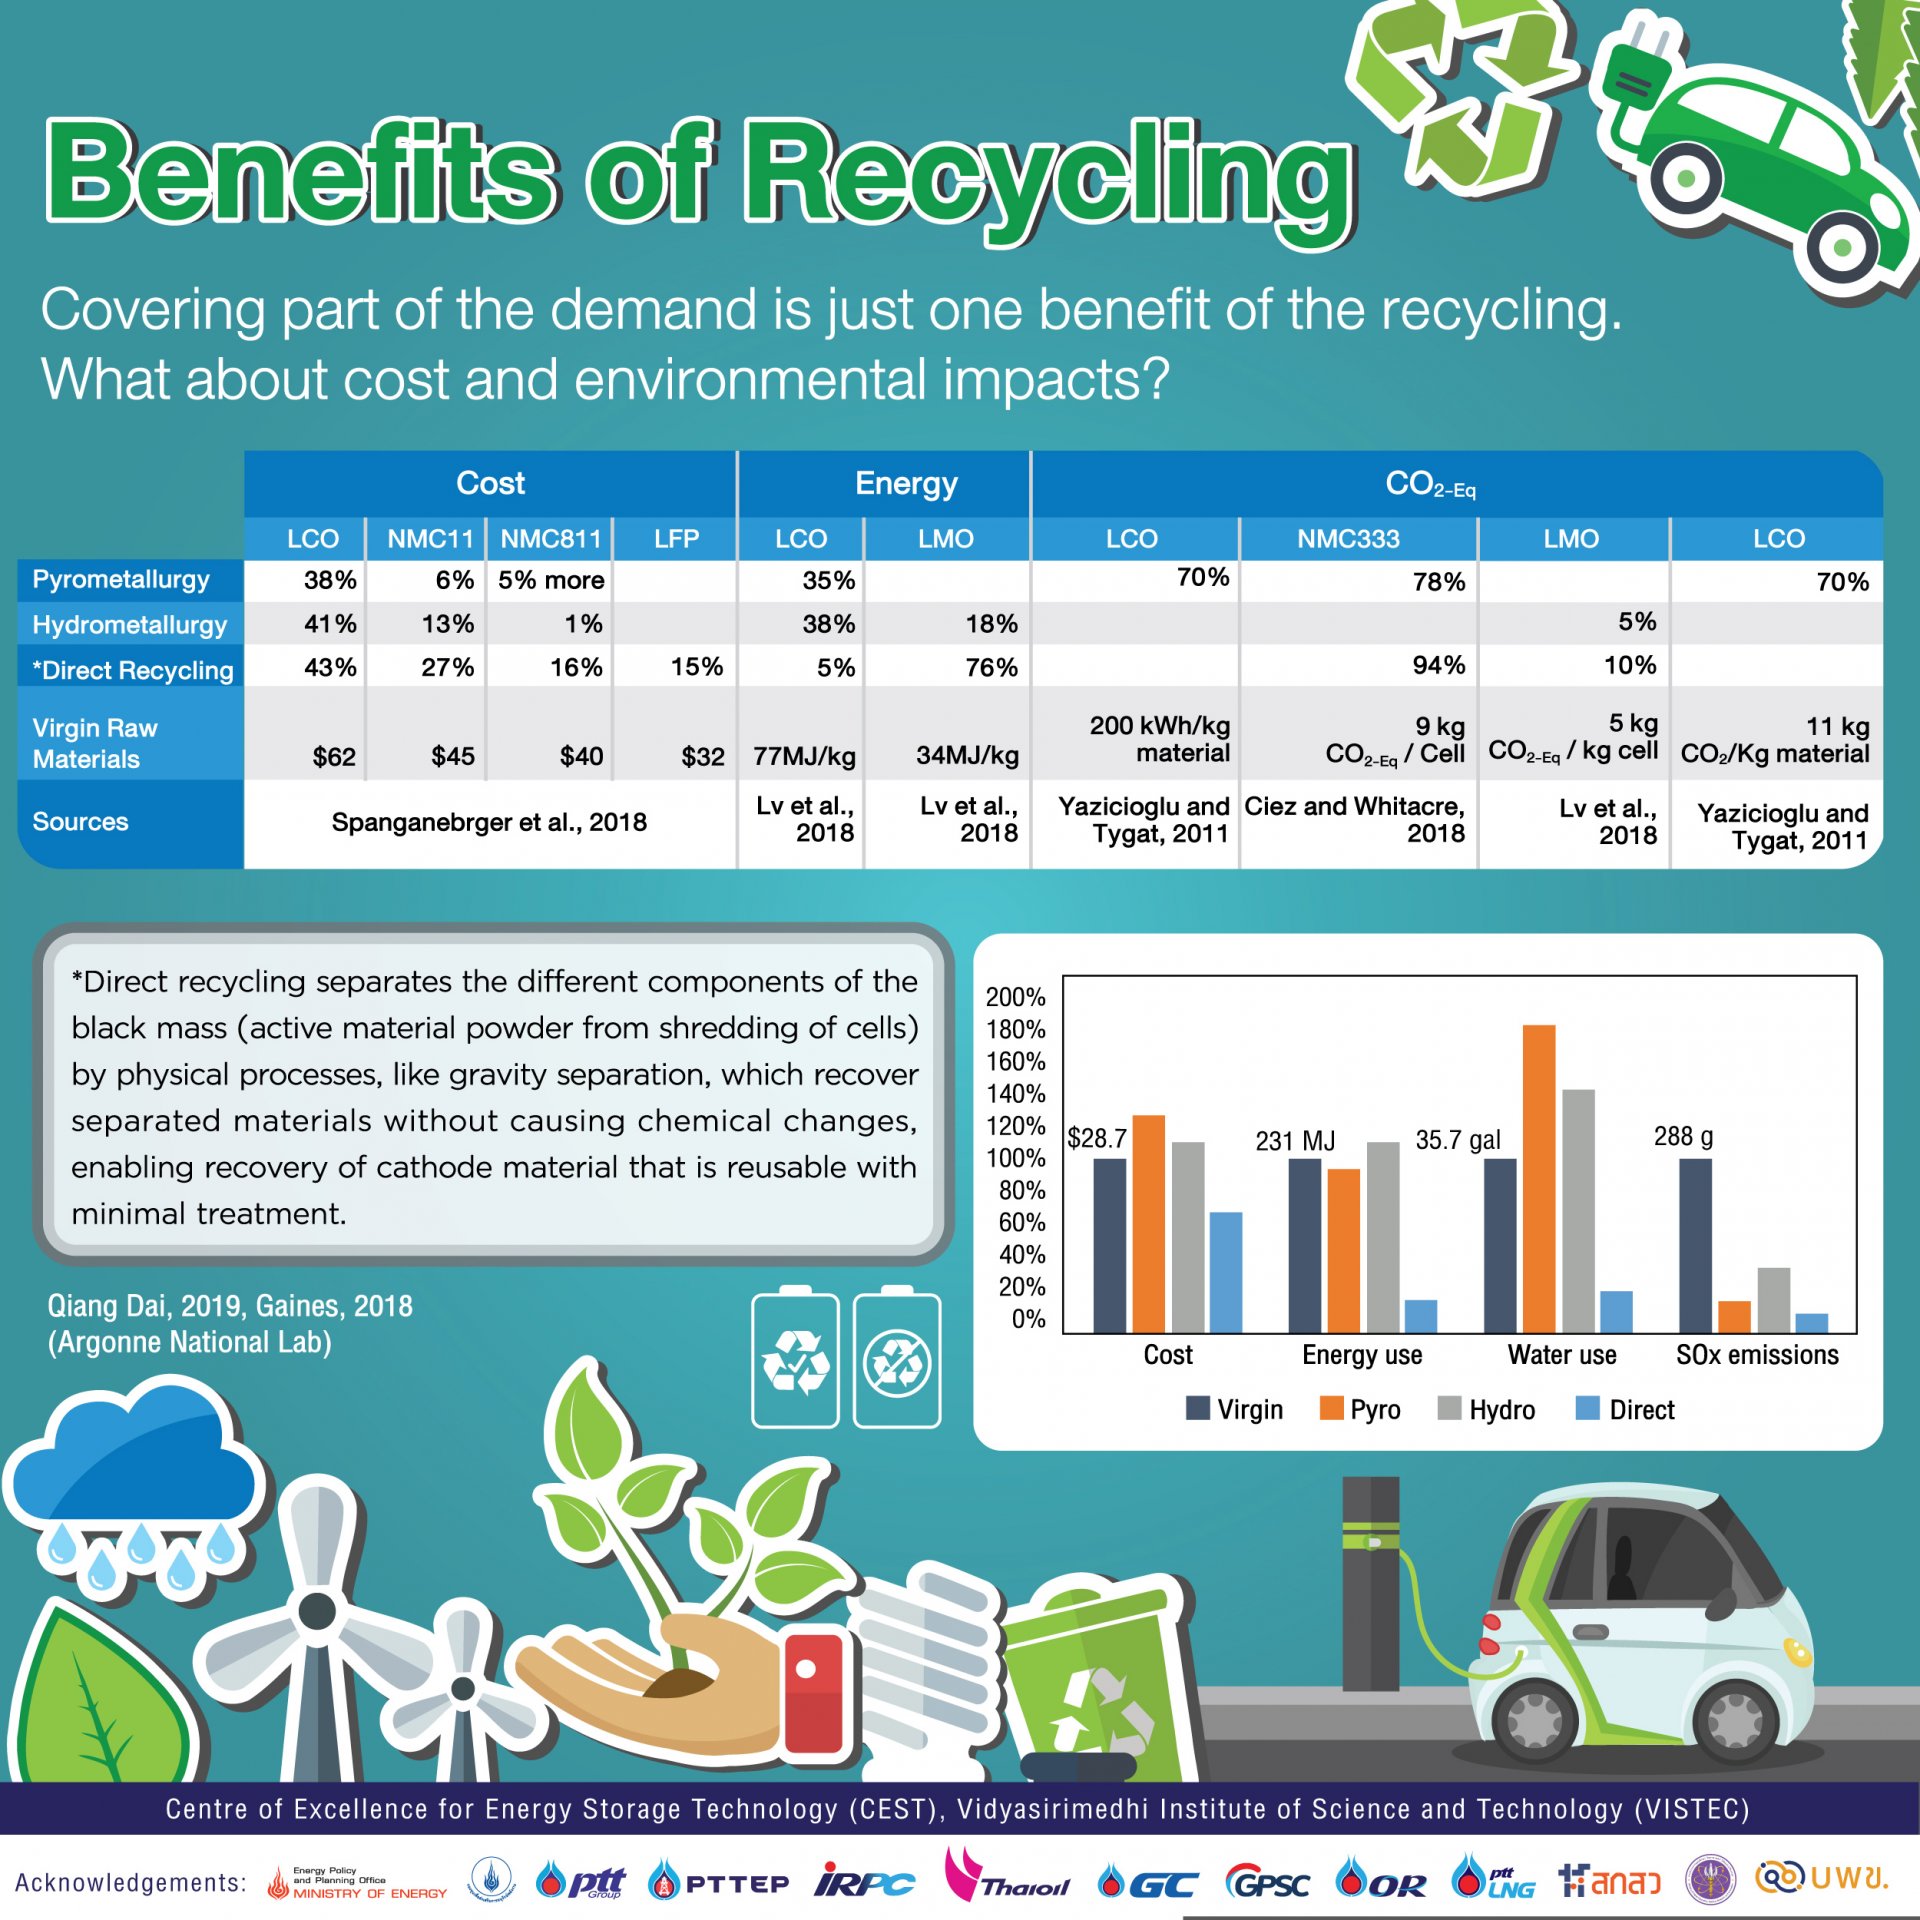 Benefits of Recycling Covering part of the demand is just one benefit of the recycling. What about cost and environmental impacts?